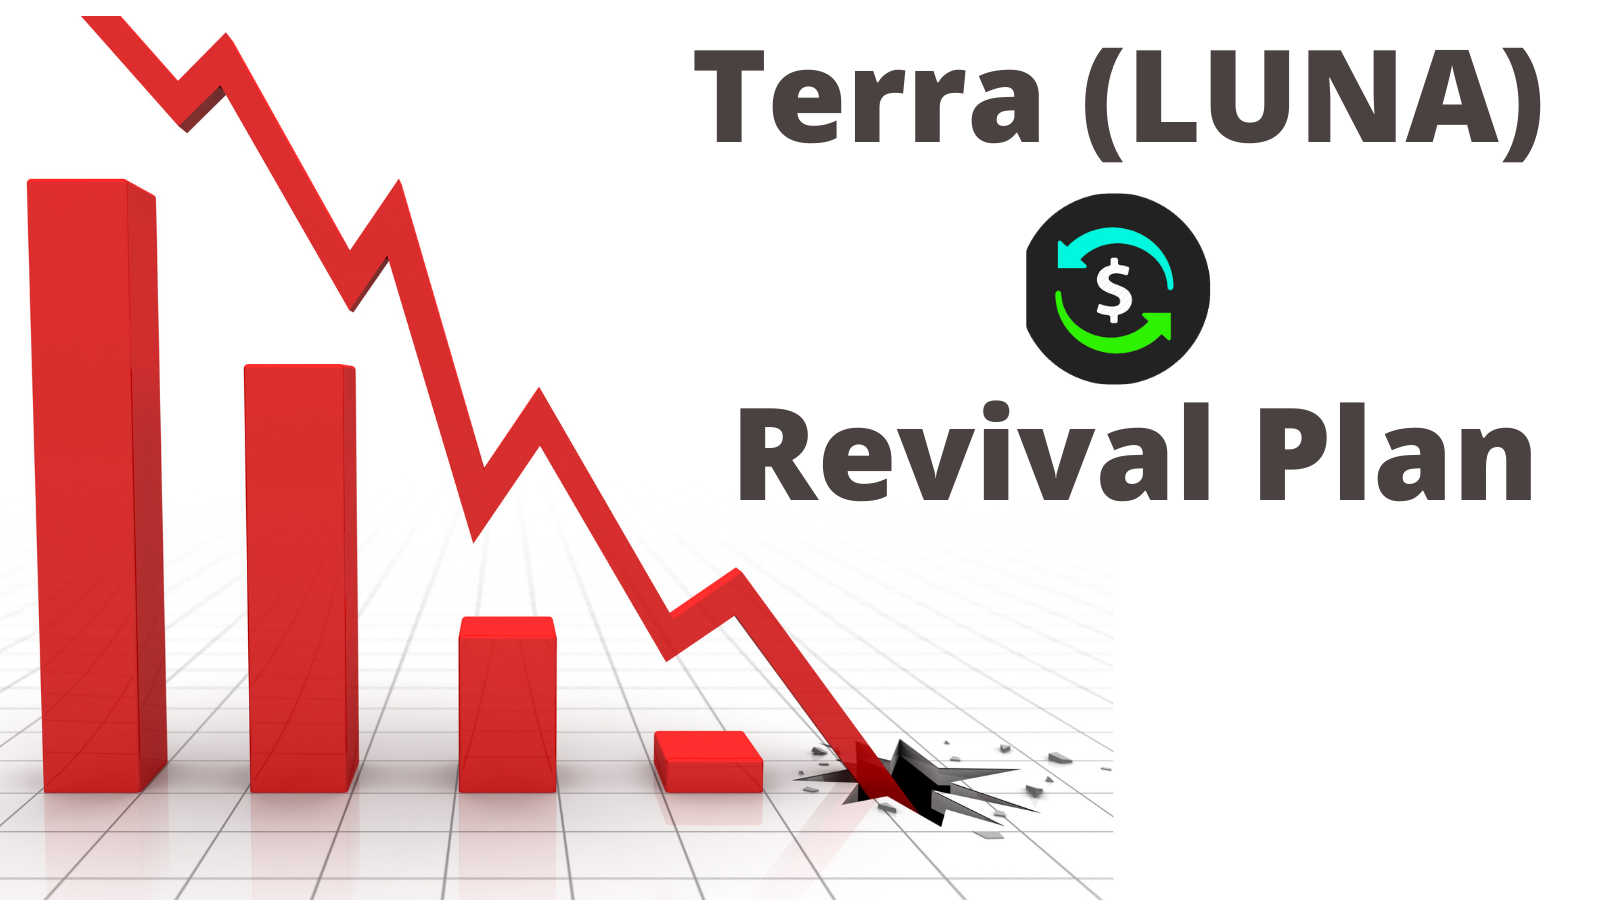 Terra Luna Revival Plan explained yay or nay.png